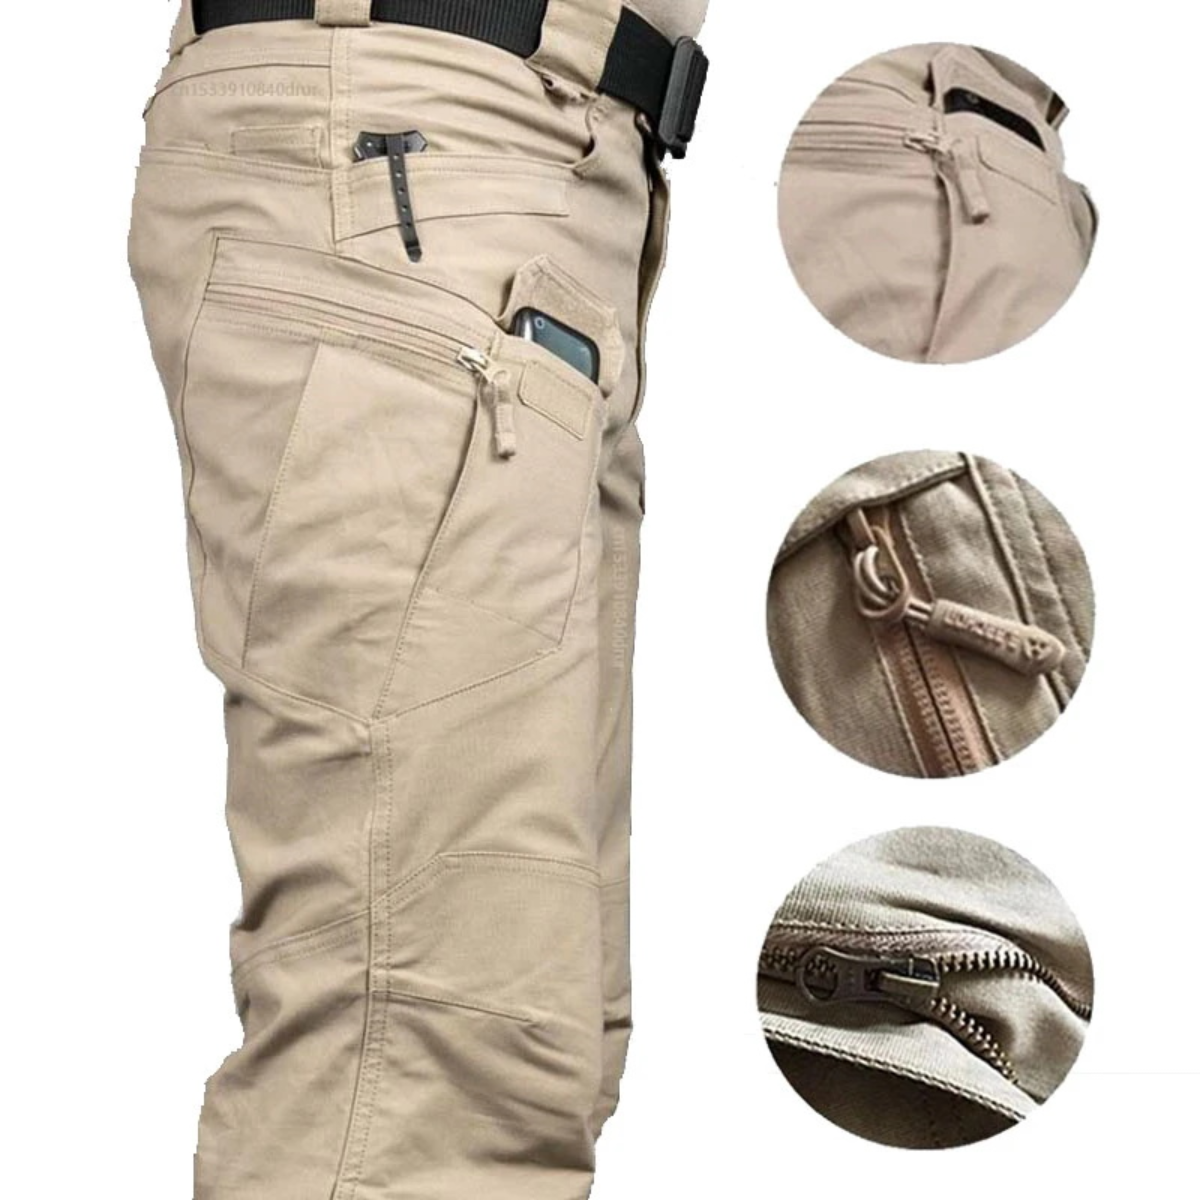 Military Tactical Ultra Resistant and Waterproof Pants + GIFT Belt